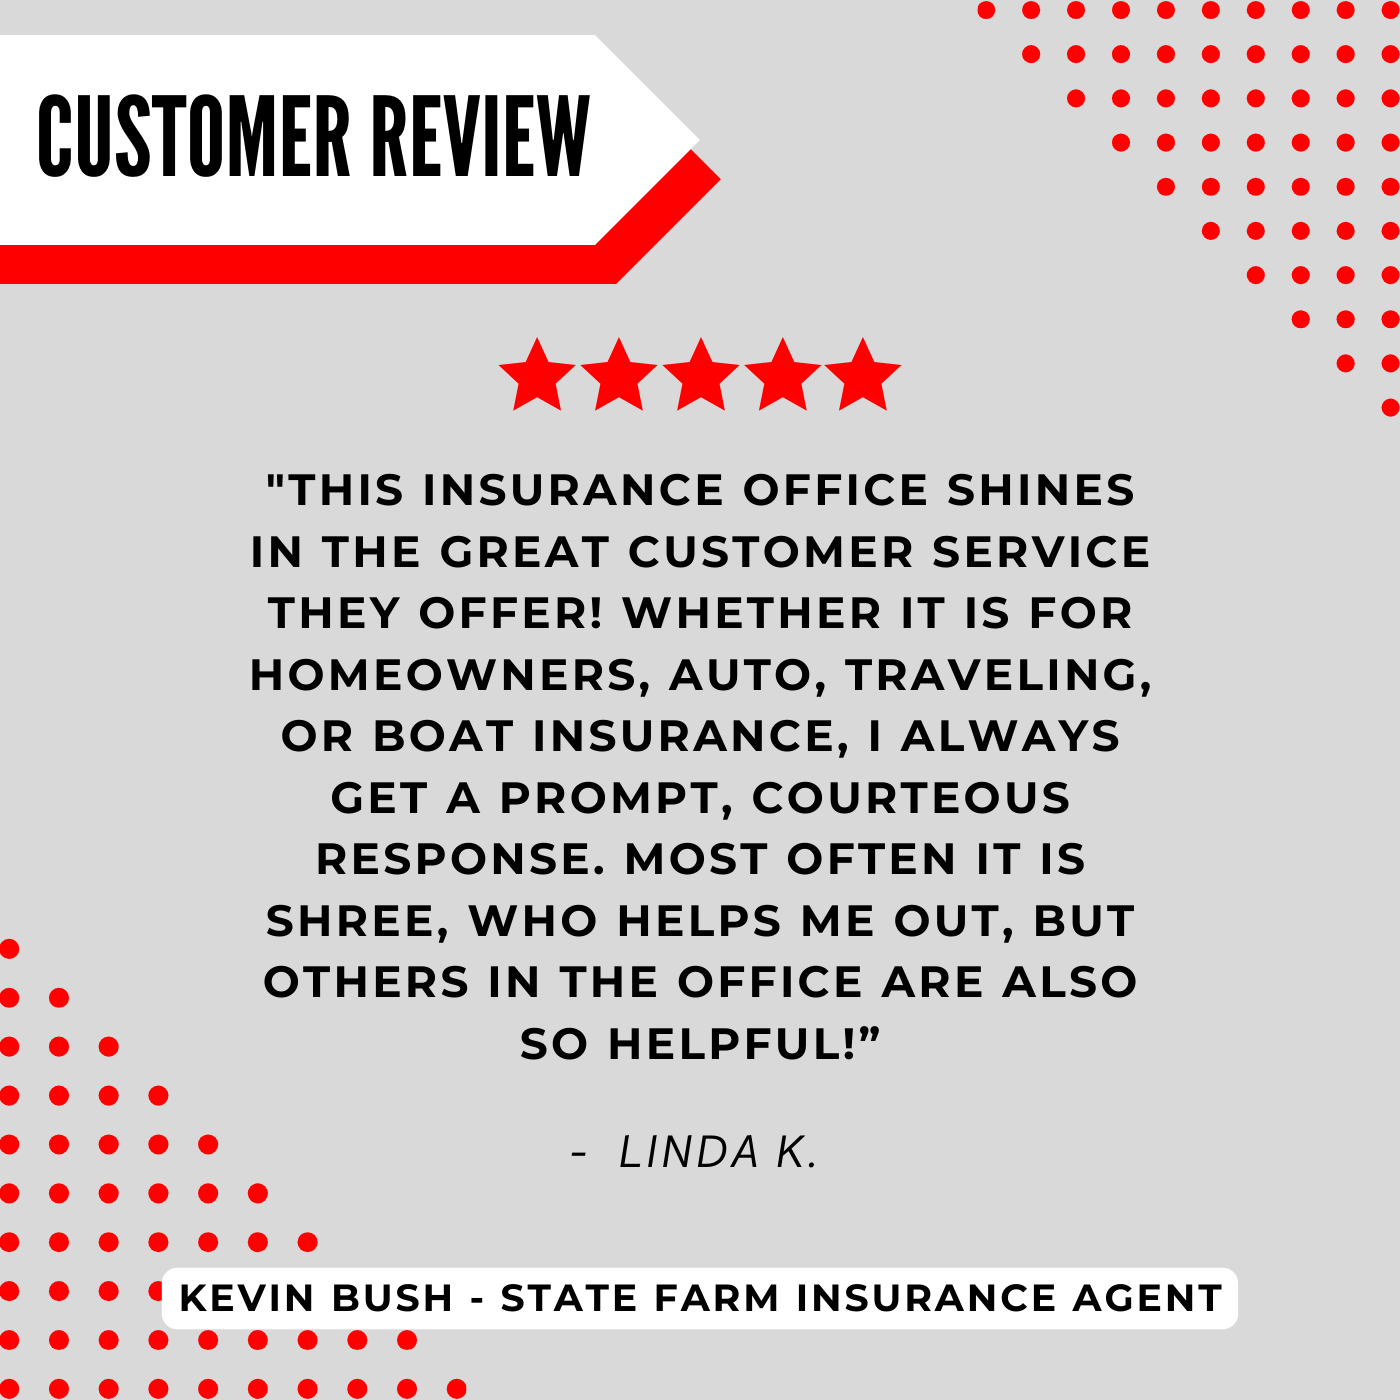 Kevin Bush - State Farm Insurance Agent
Review highlight